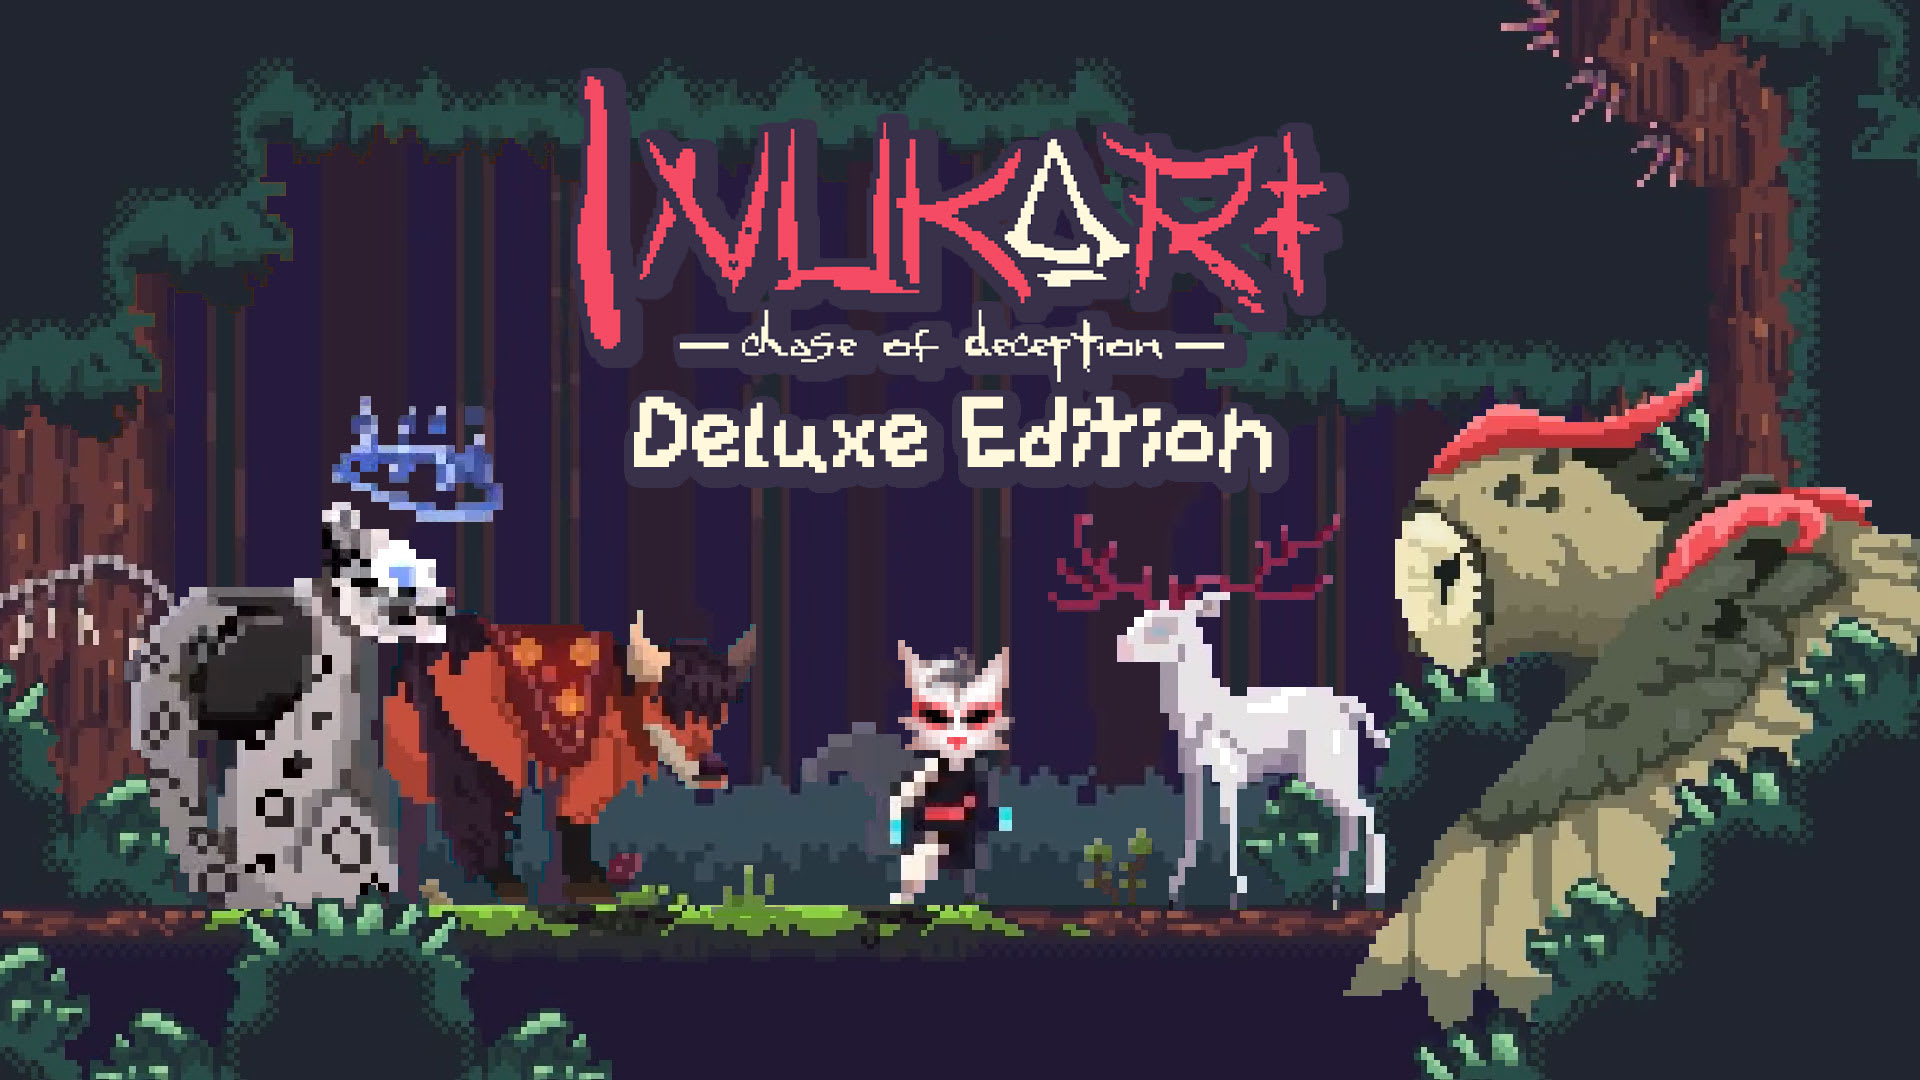 Inukari - Chase of Deception Deluxe Edition